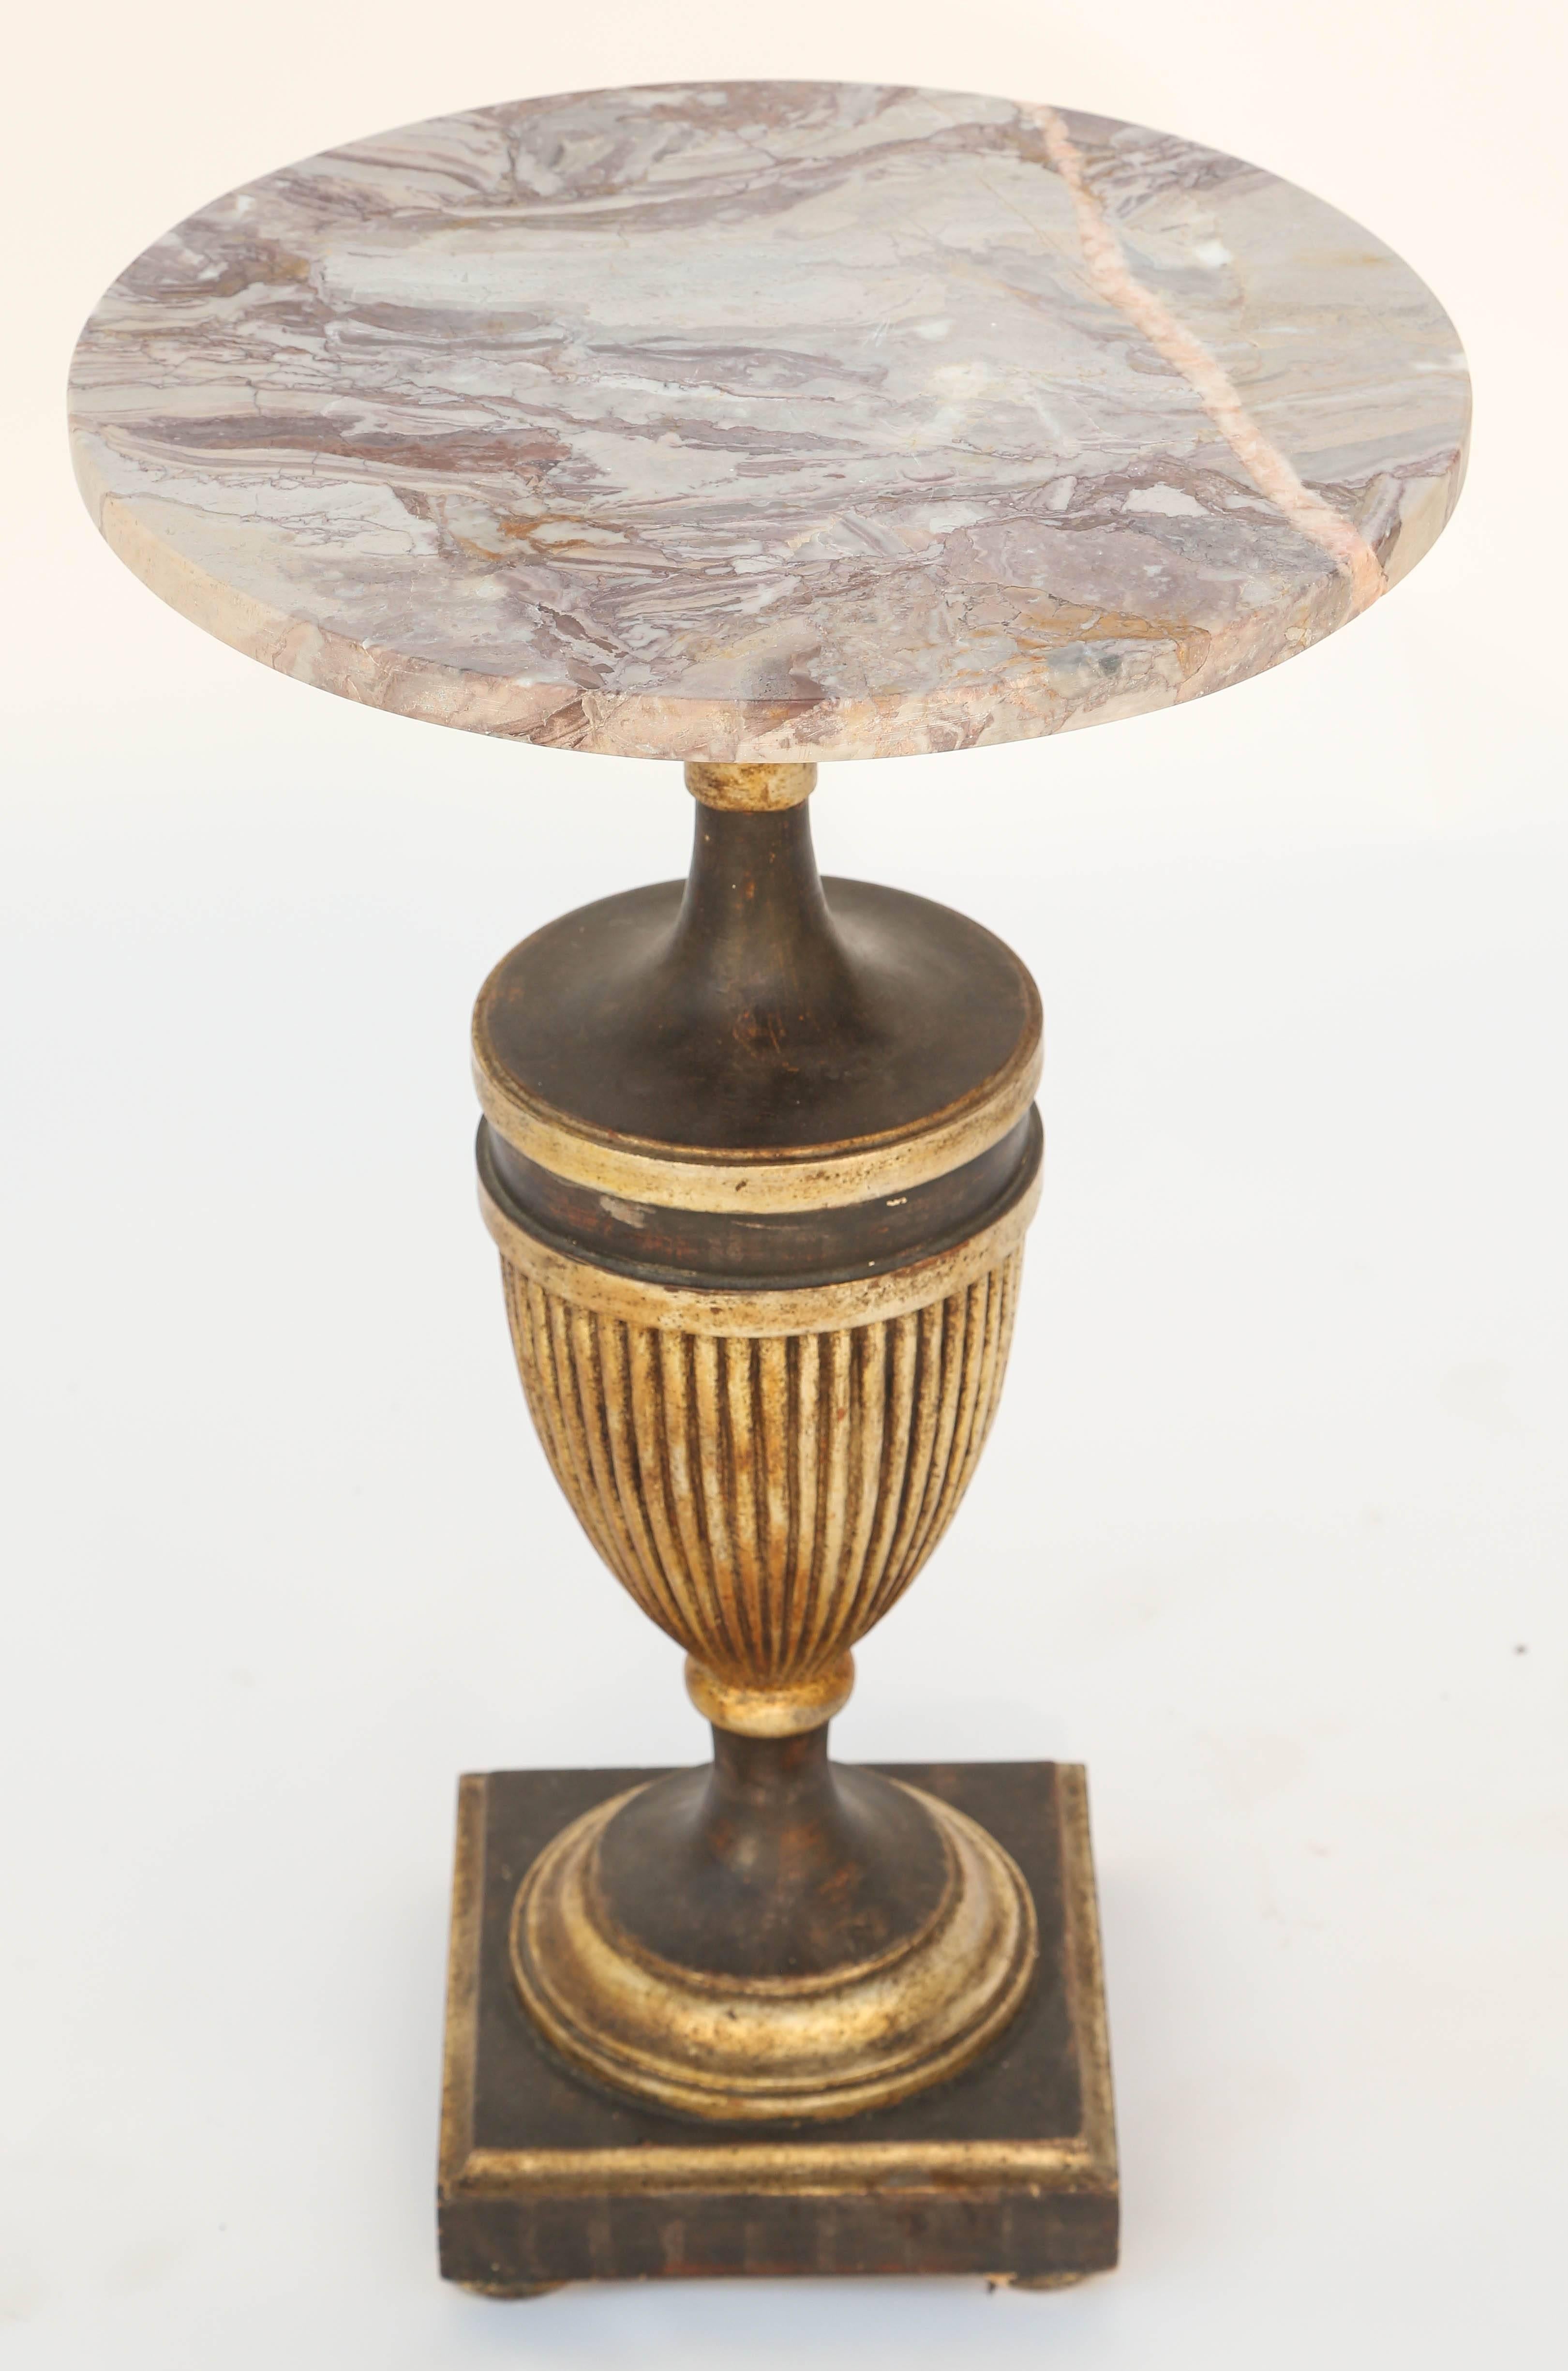 Side table, having a round top of rouge marble, on painted and parcel silver gilt pedestal base, carved in an urn form with fluted body, on round foot, set upon a square plinth base.

Stock ID: D9416